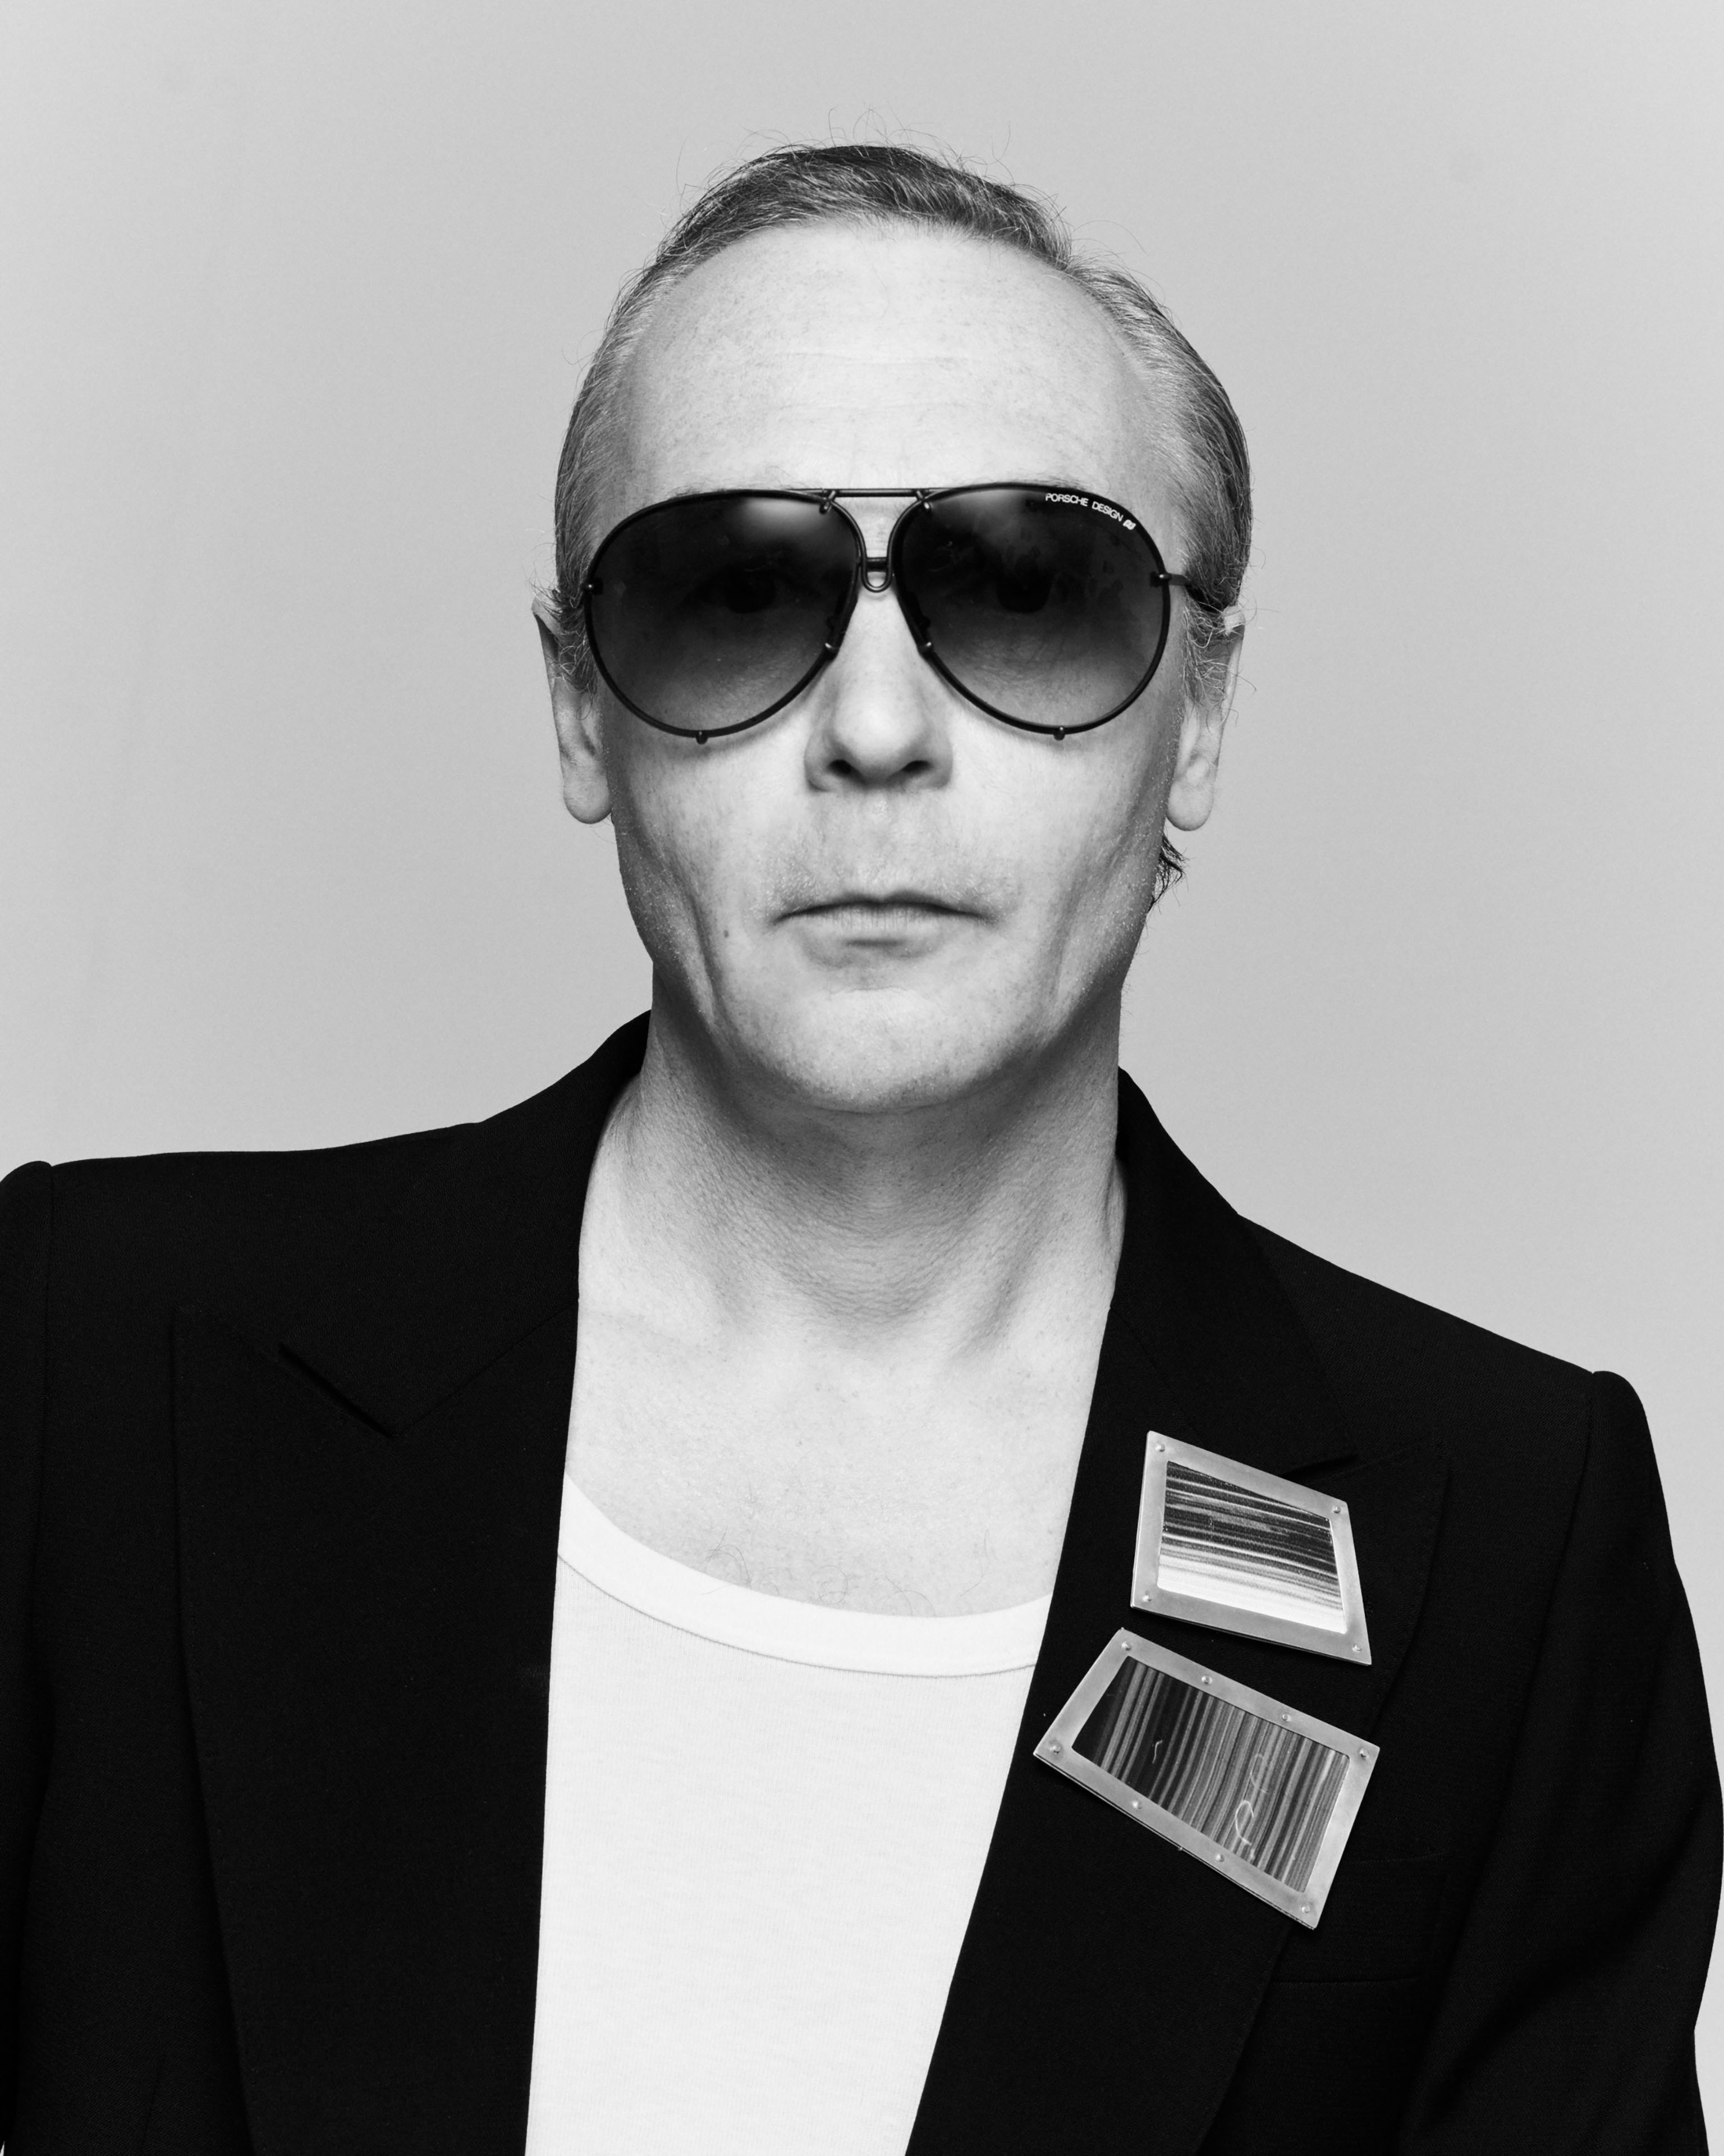 Artist Robert Jelinek wears two brooches on the lapel of the black jacket and sunglasses, his hair is strictly combed back